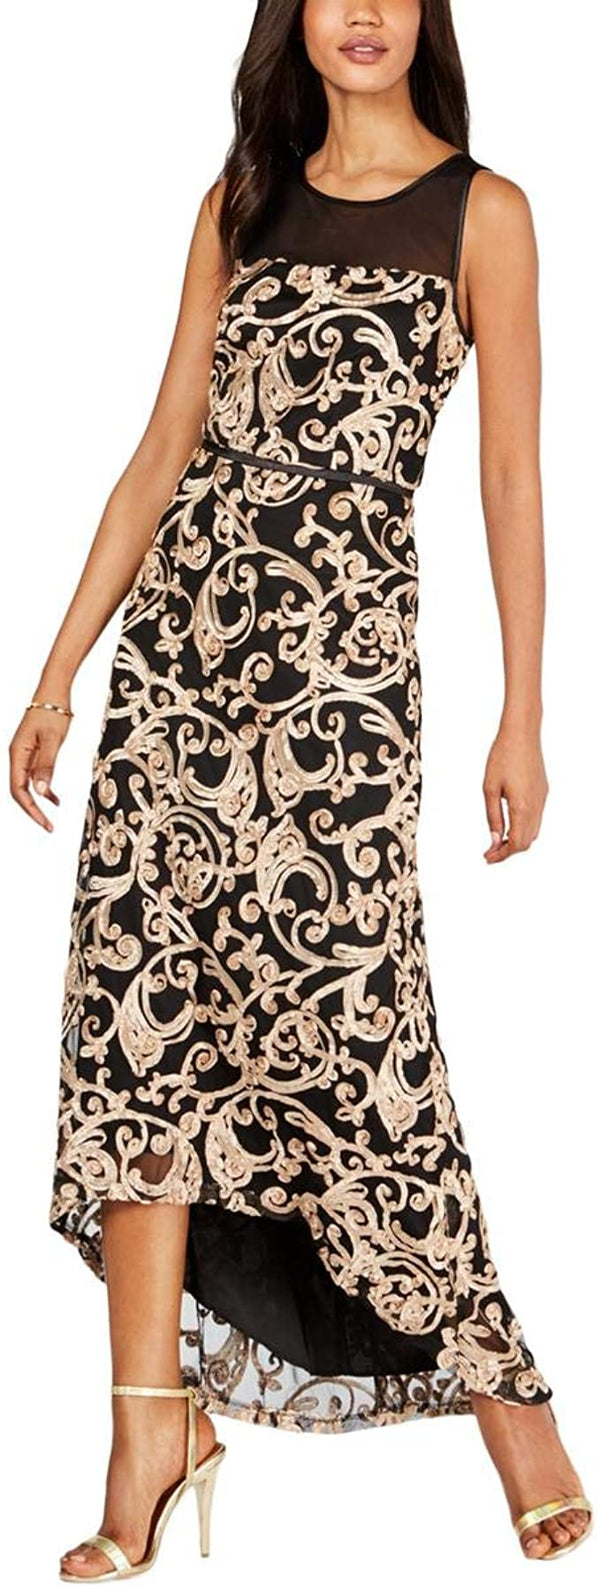 Connected Apparel Womens High Low Soutache Gown